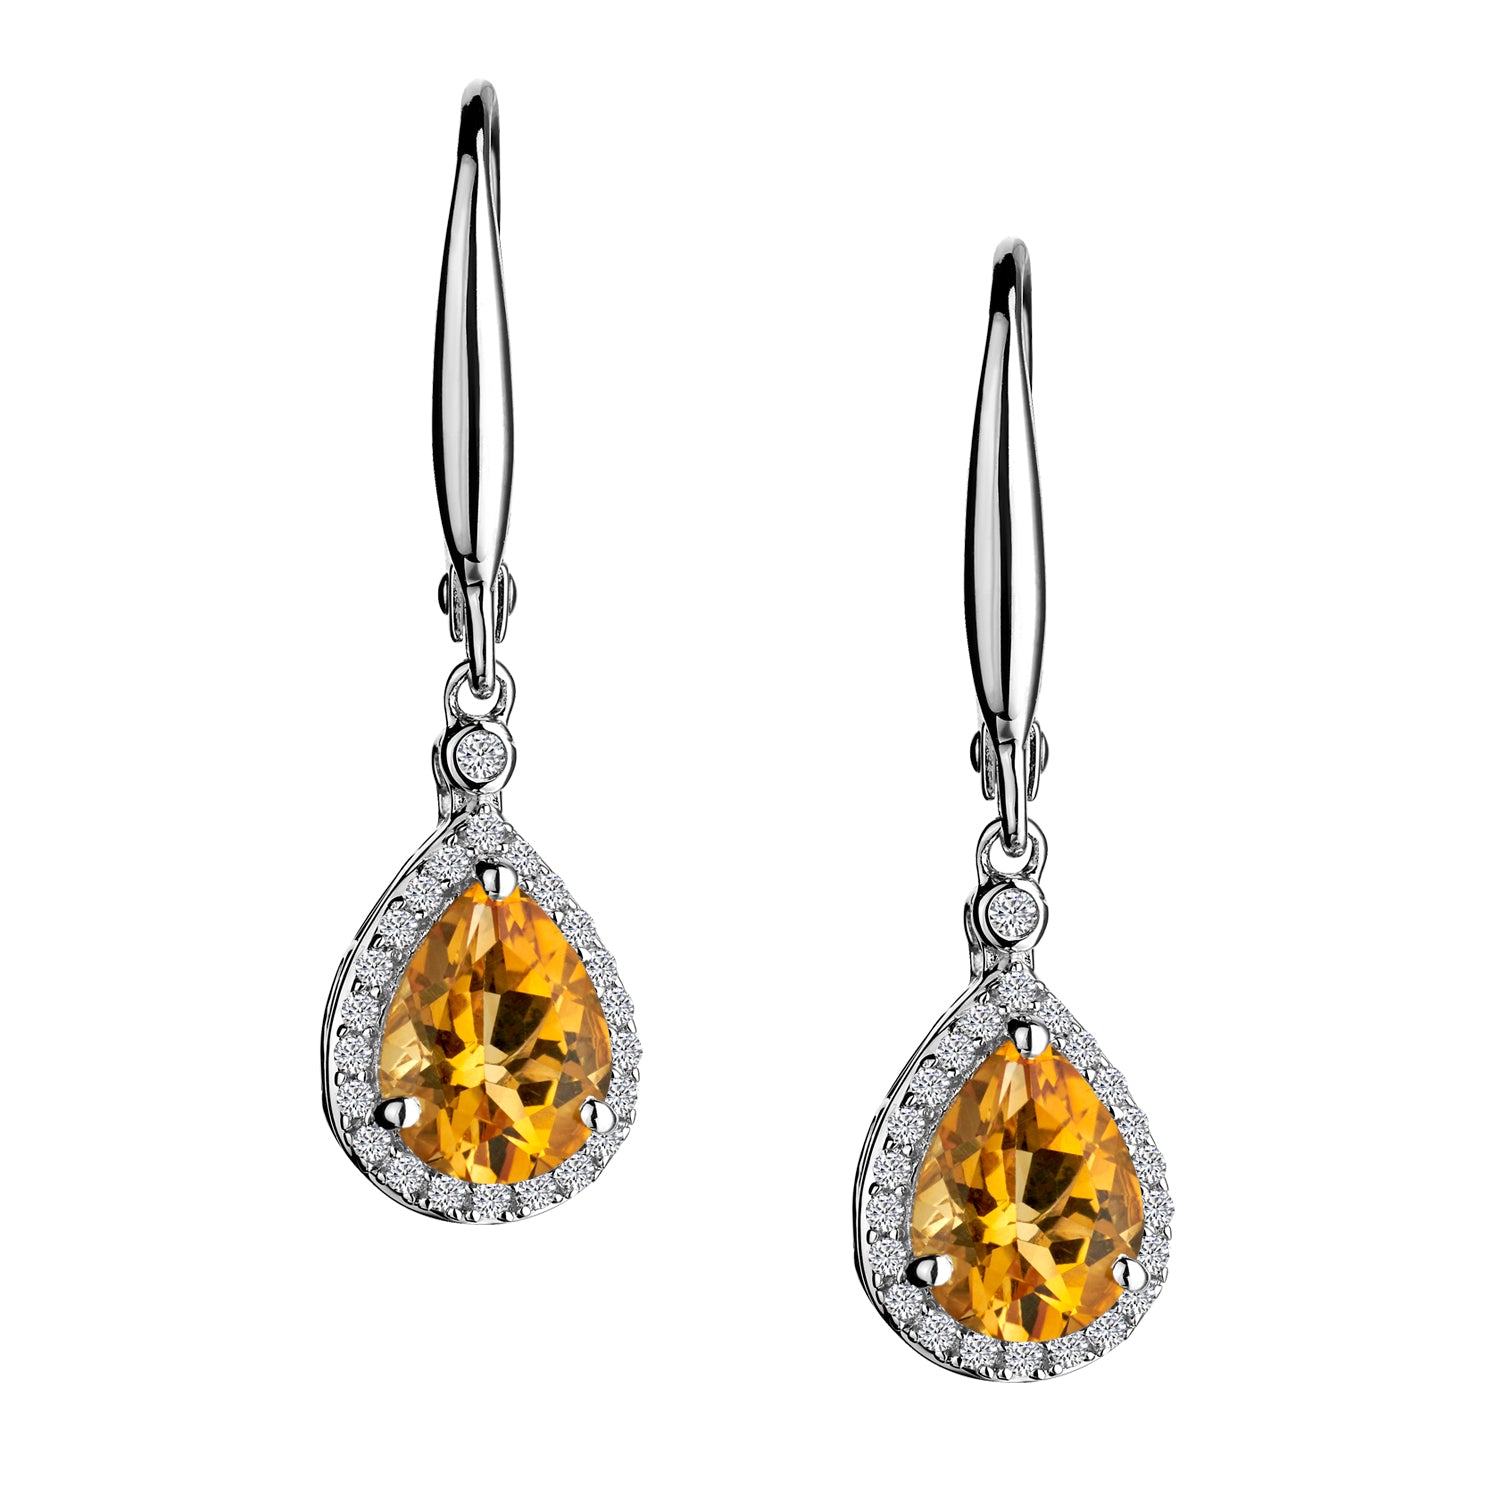 Genuine Citrine & Created White Sapphire Drop Earrings, Silver.....................NOW